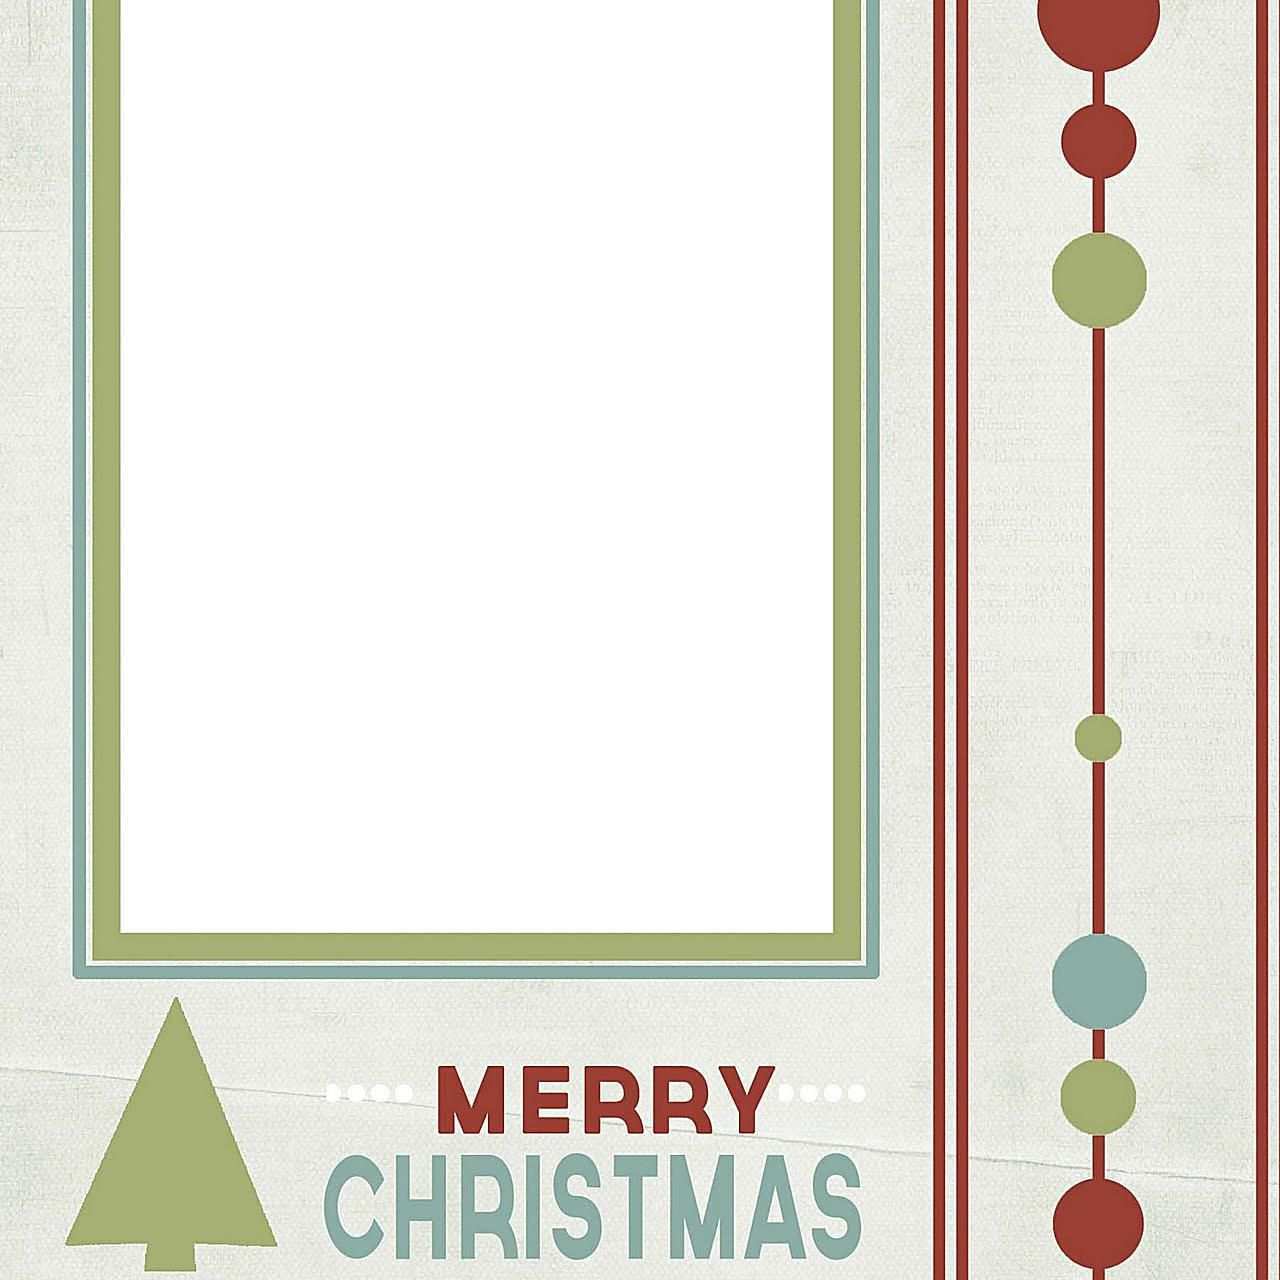 41 Visiting Christmas Card Template For Photos Formating with Christmas Card Template For Photos